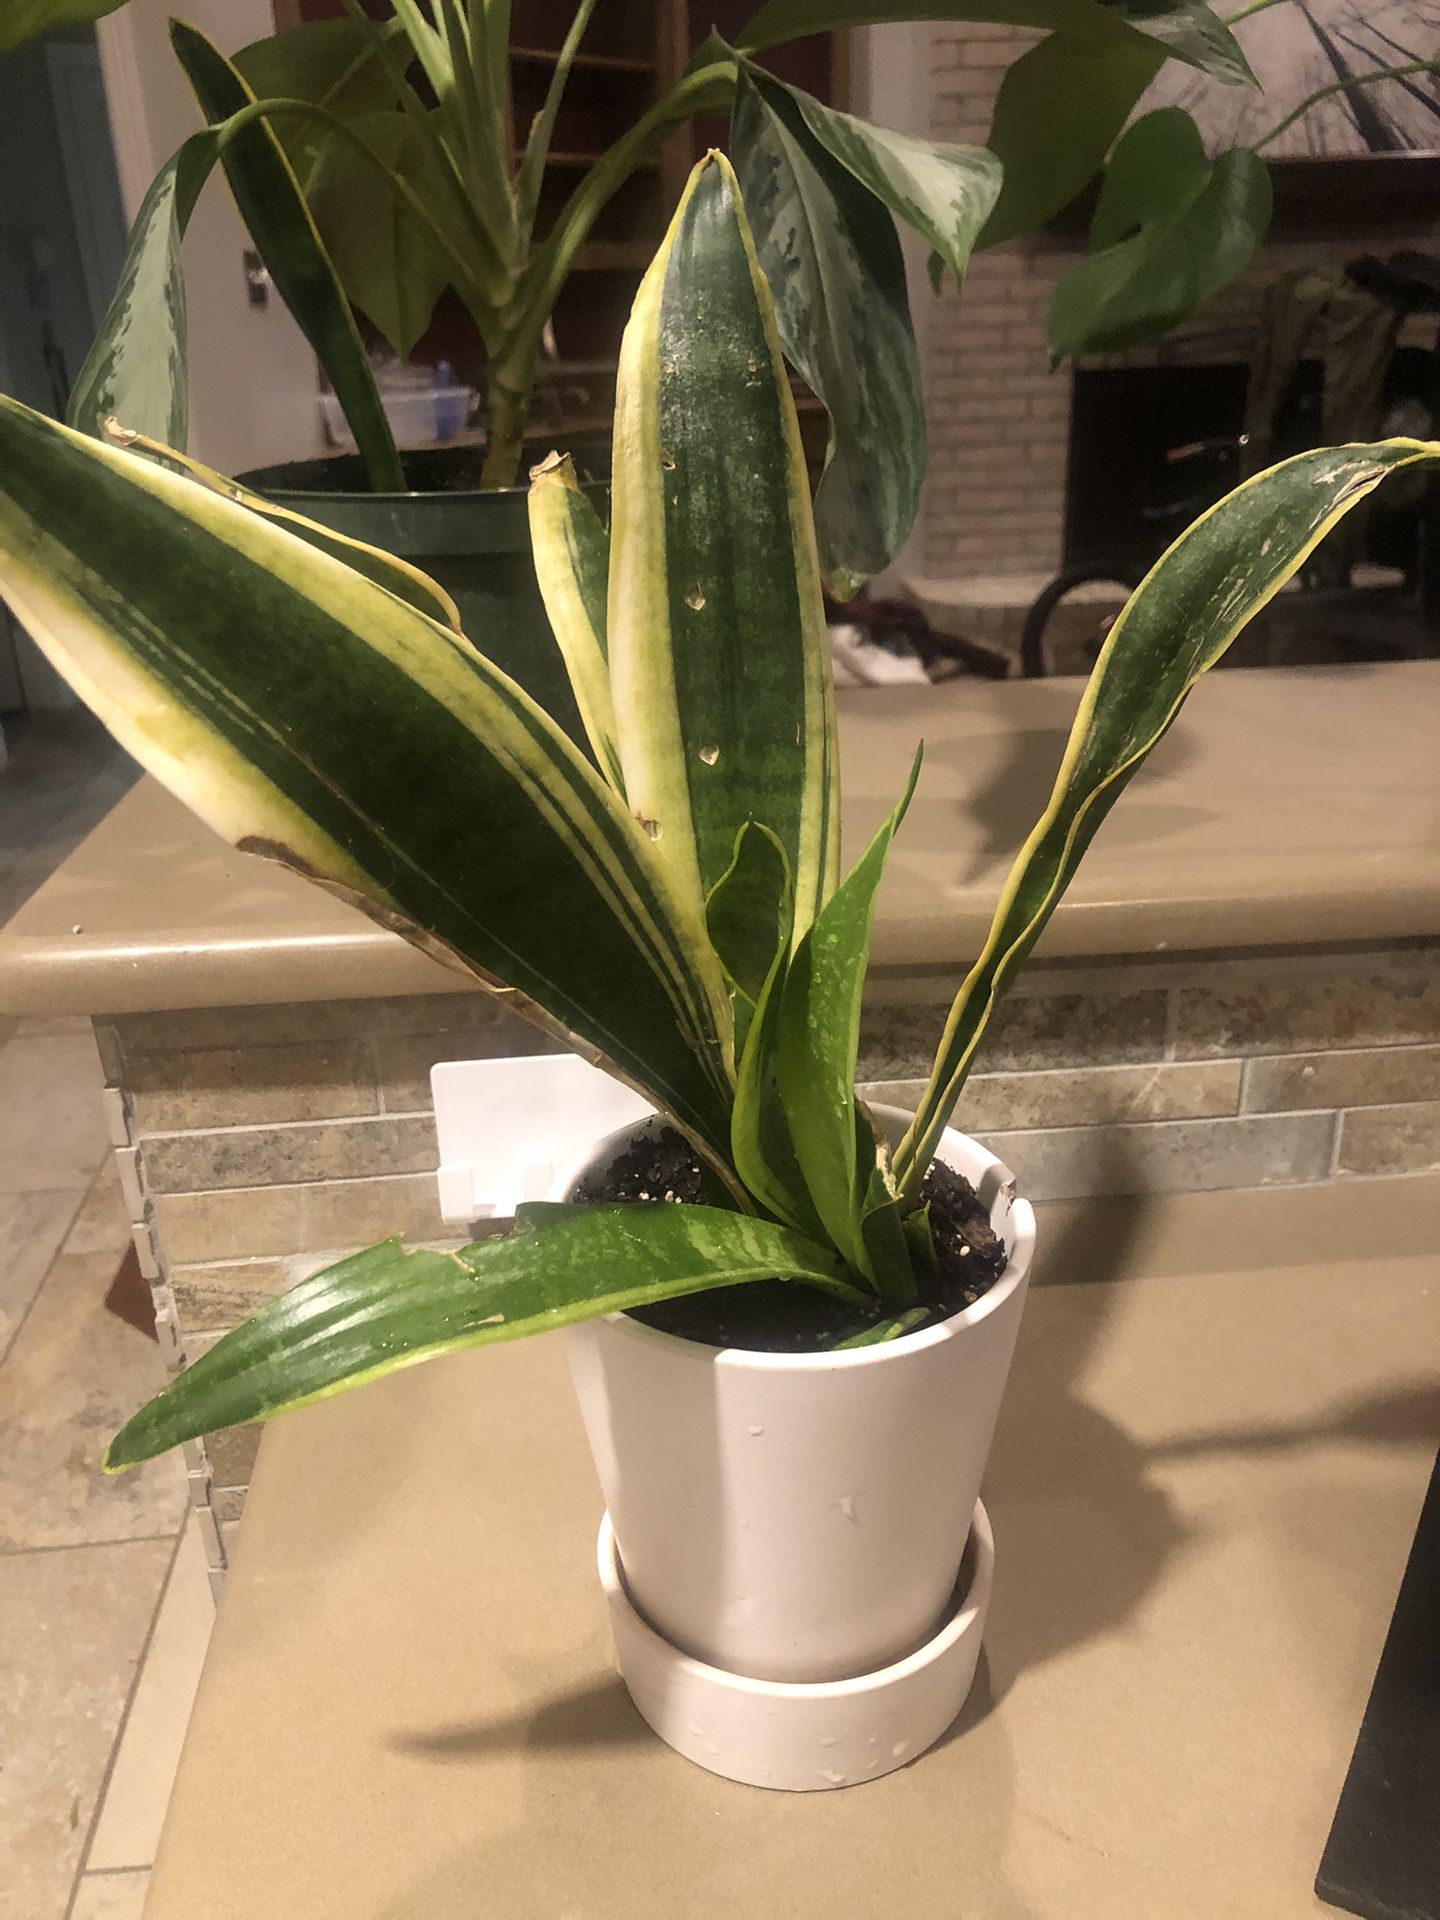 Snake Plant Includes The Pot  $10